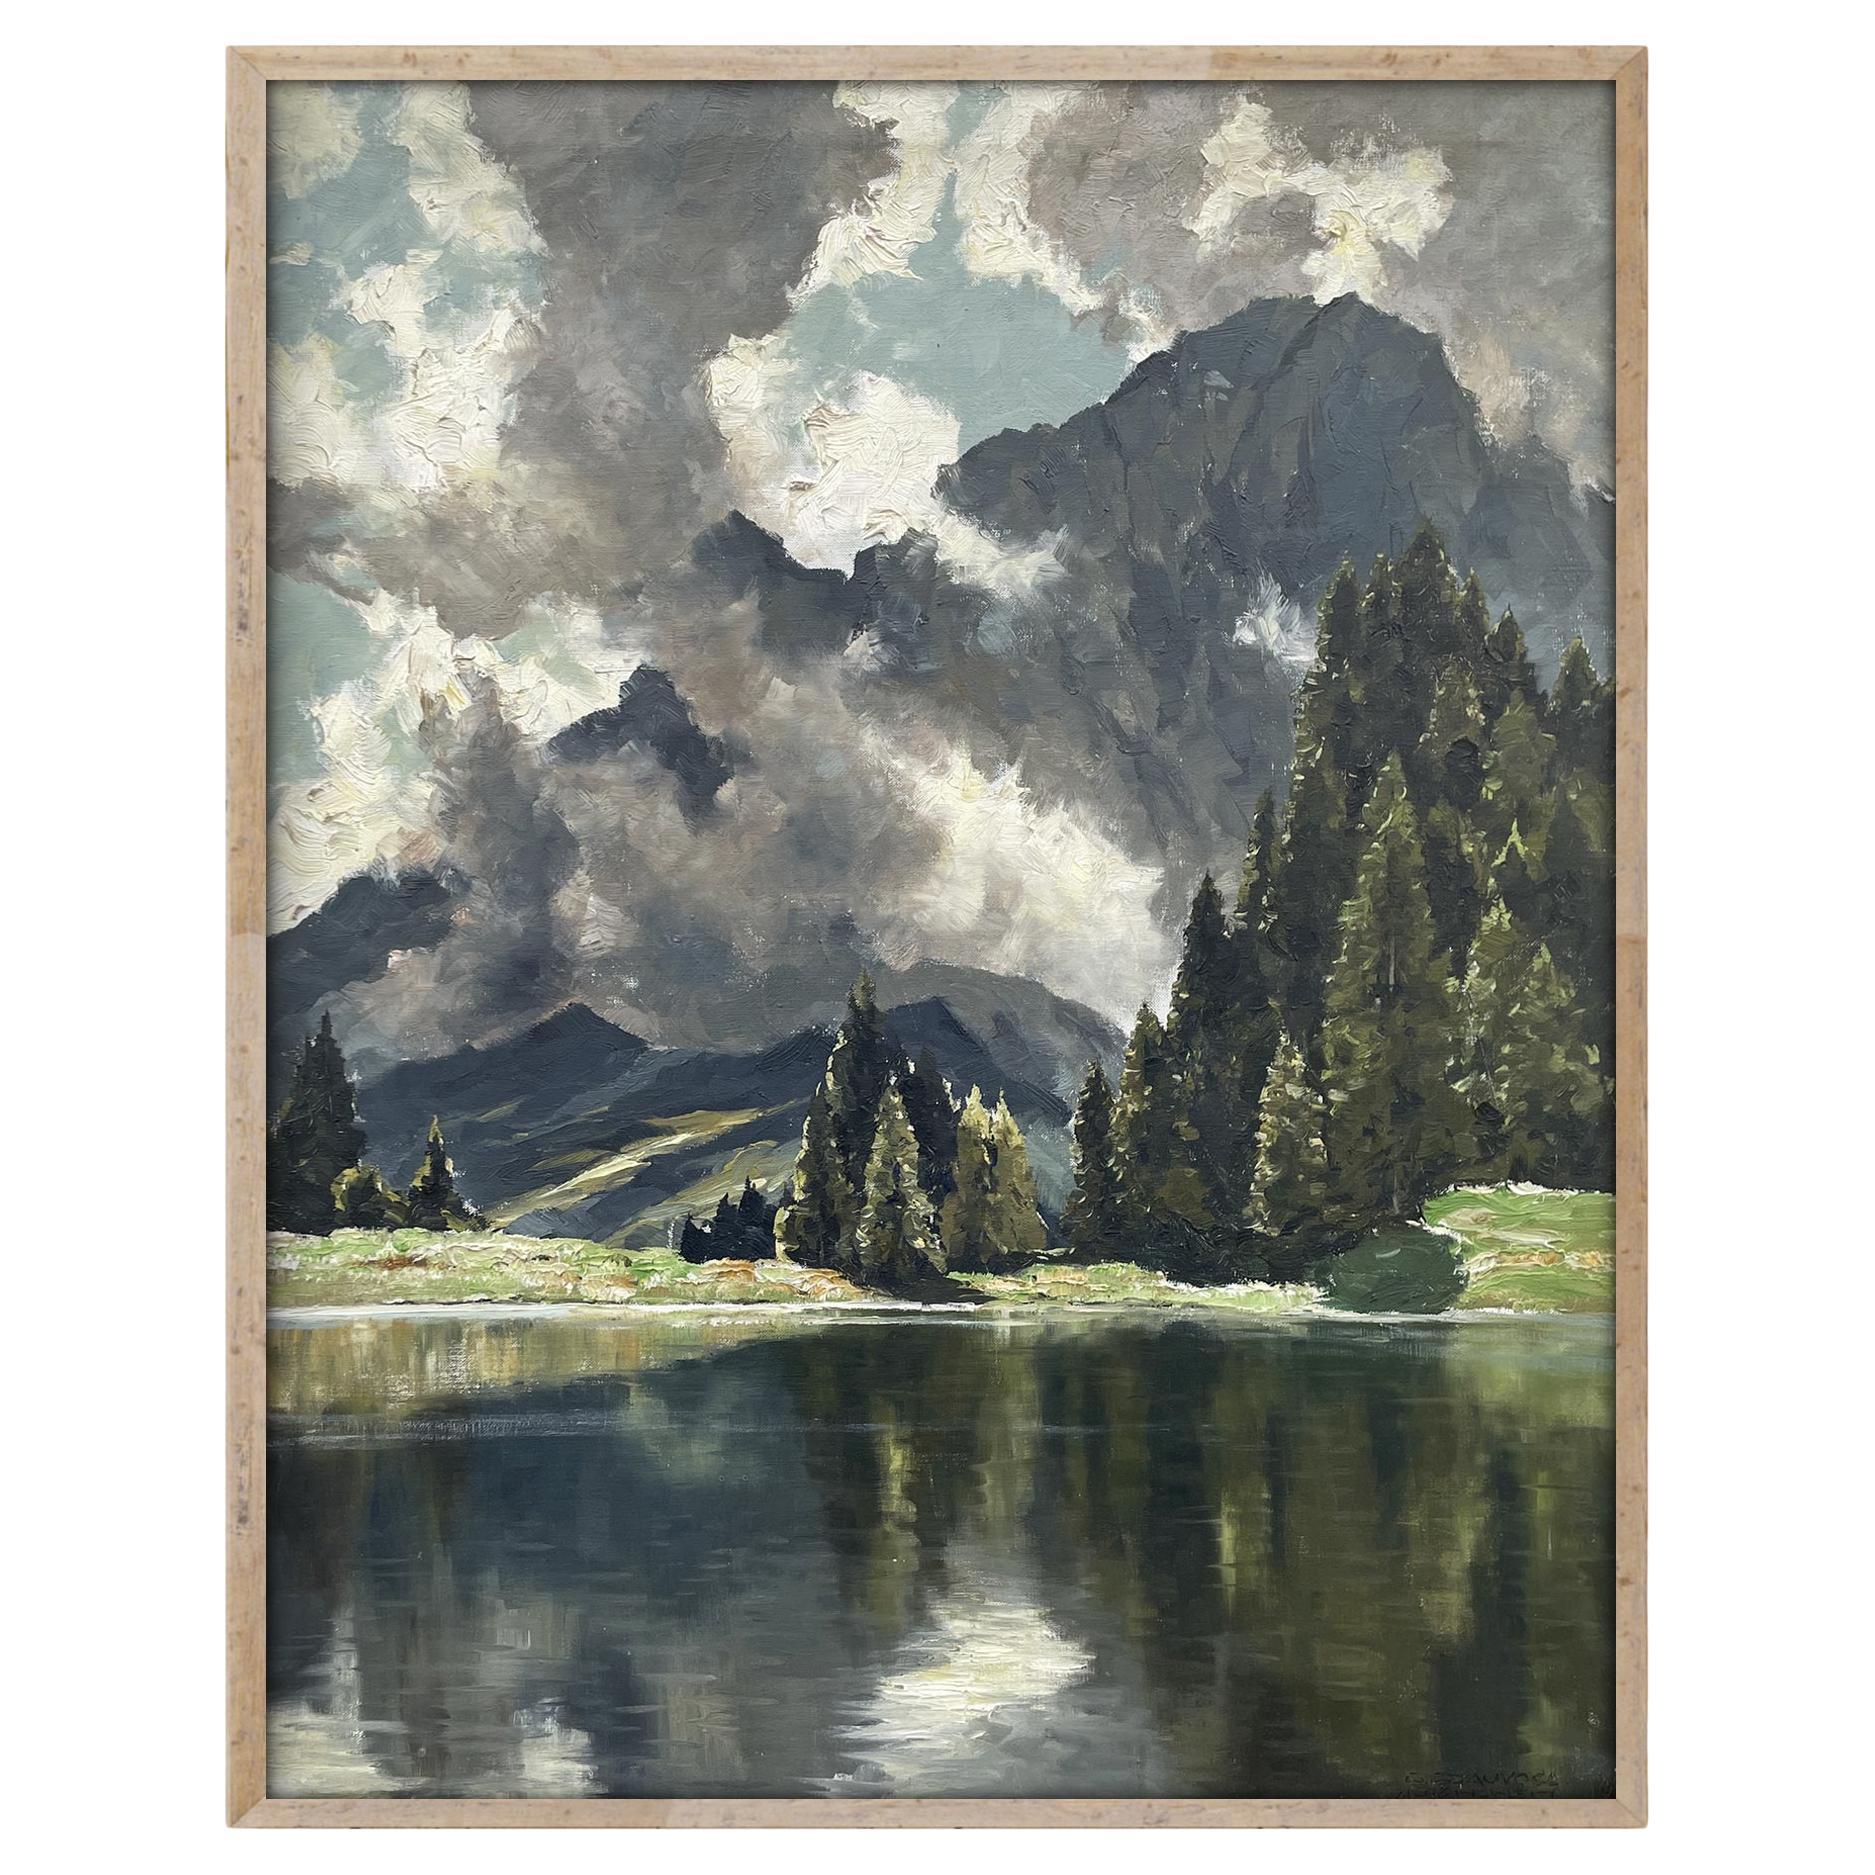 View of Lake Limides Italian Dolomites Oil on Canvas by Georg Grauvogl  For Sale